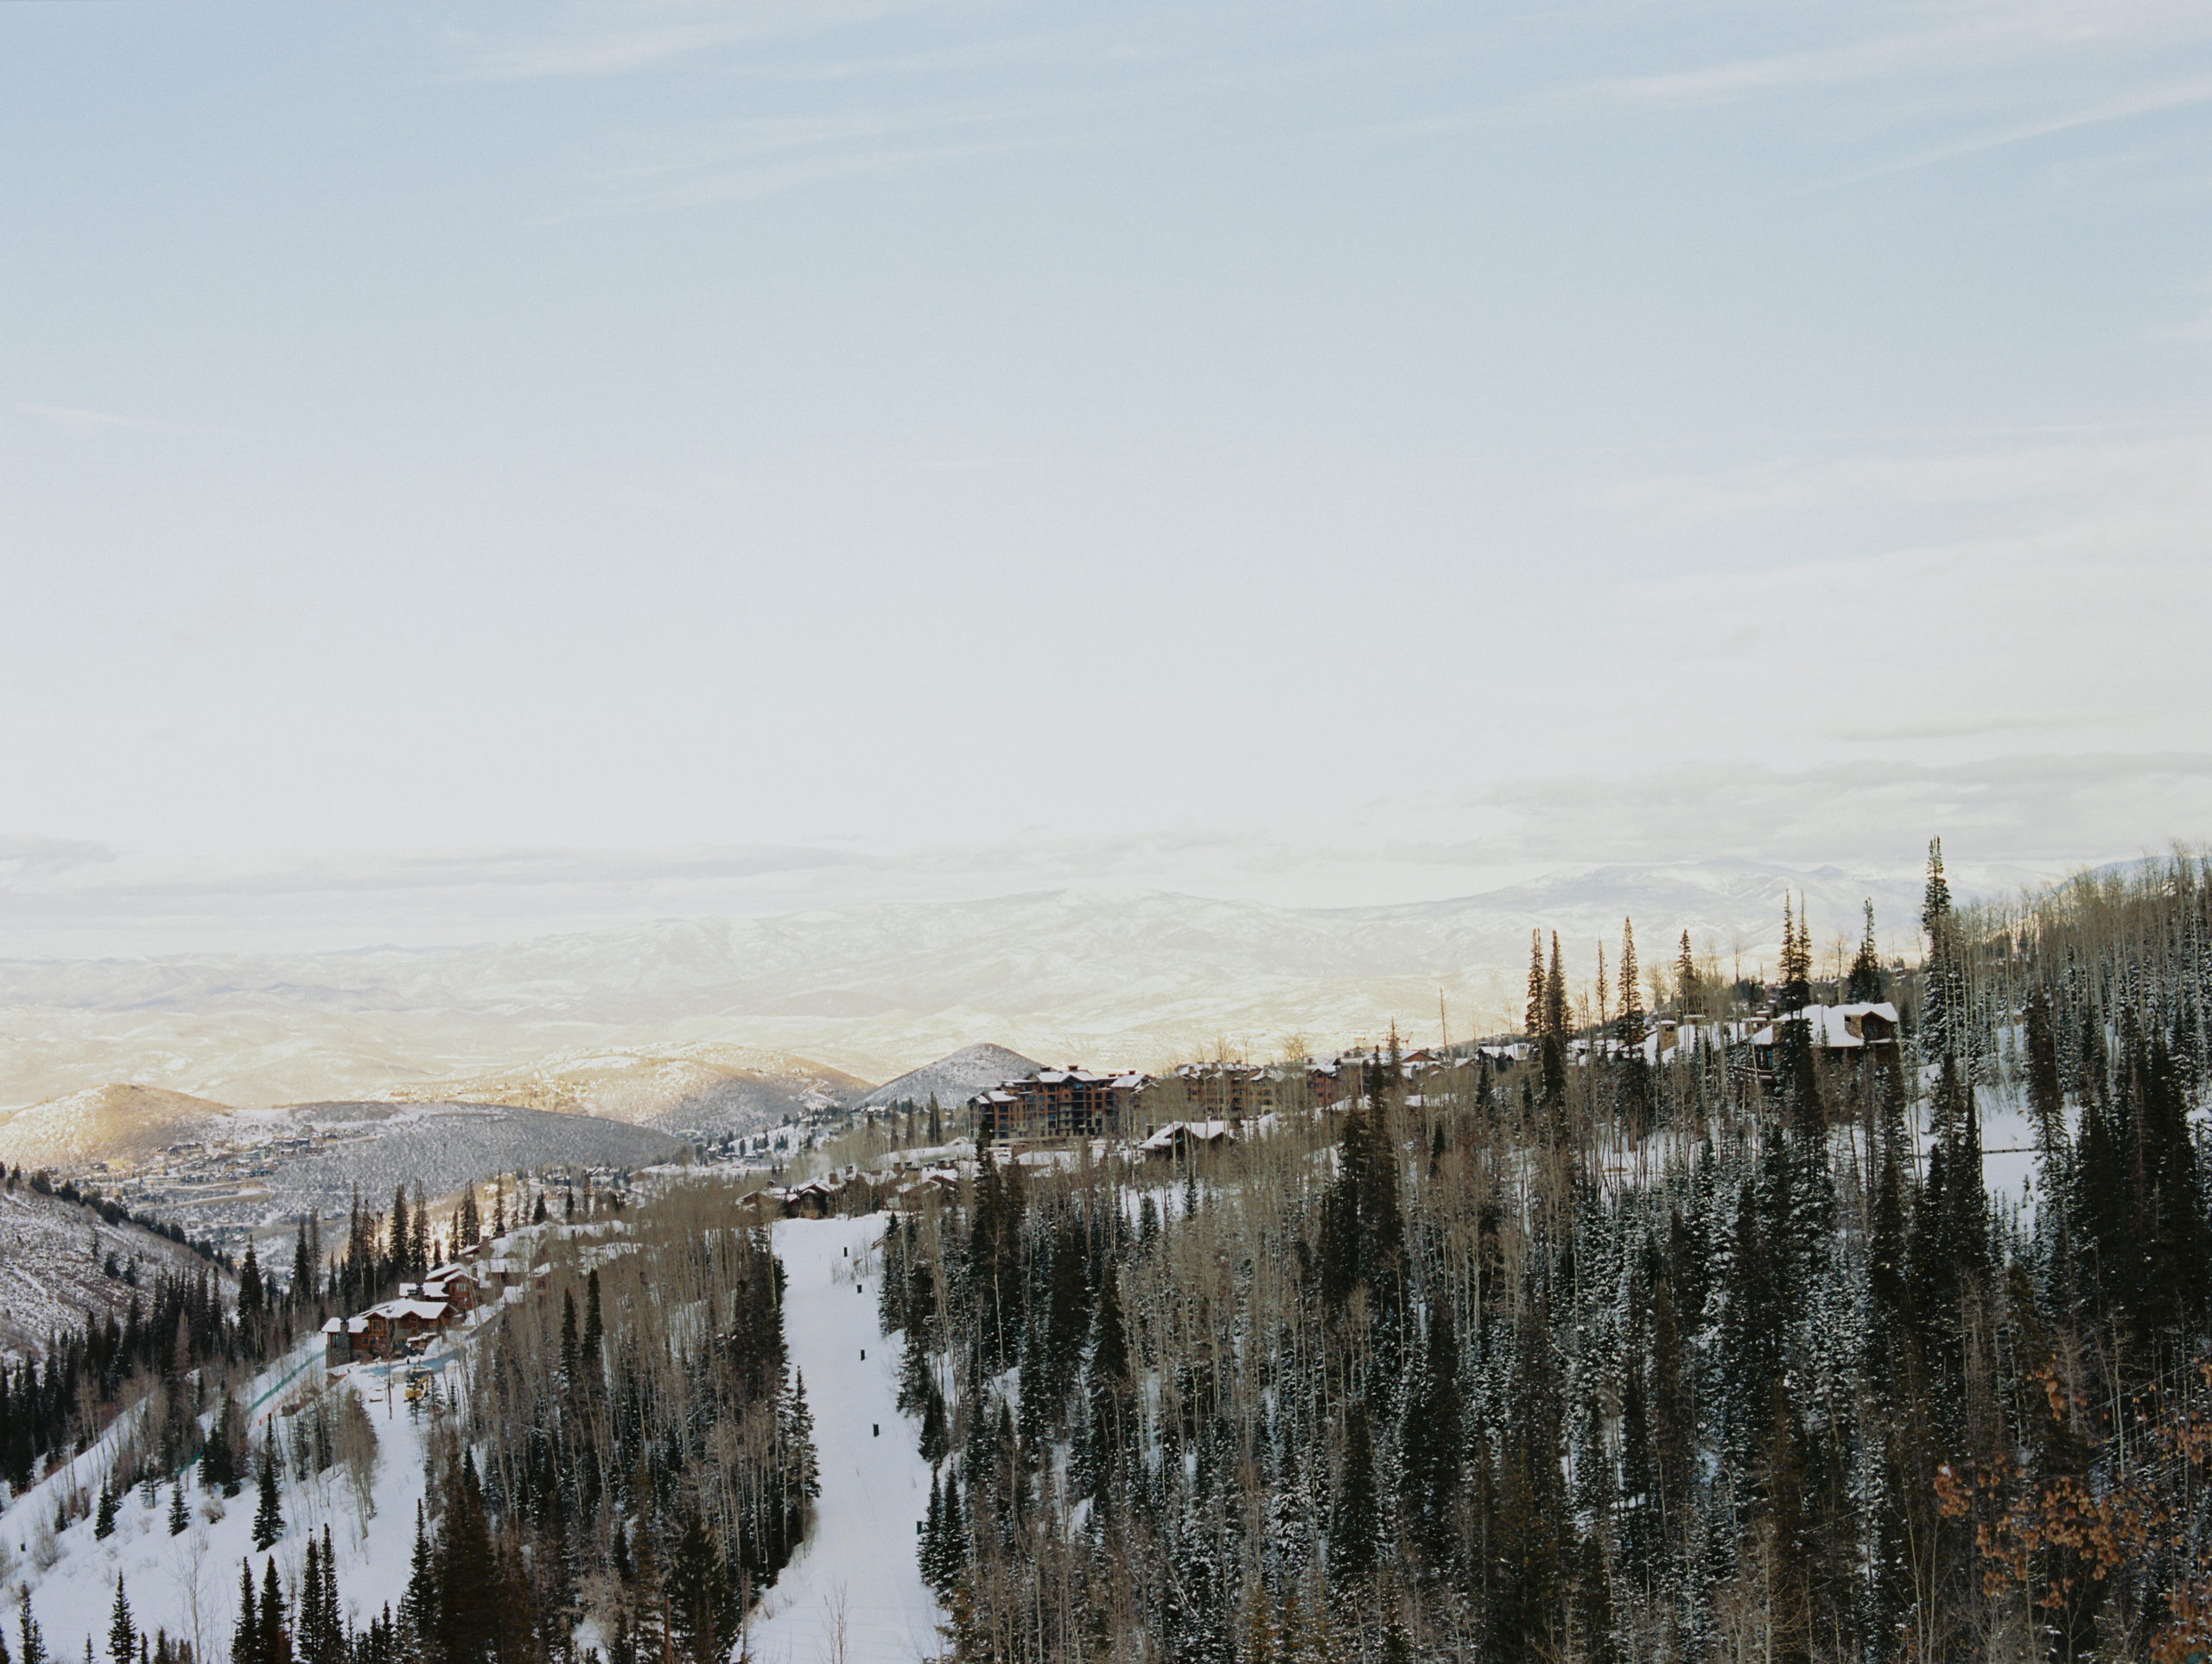 Another scenic view of the snowy mountains at Montage Deer Valley. The skies were blue and the snow was pure white. There are tall trees everywhere. A dream Park City winter wedding venue.